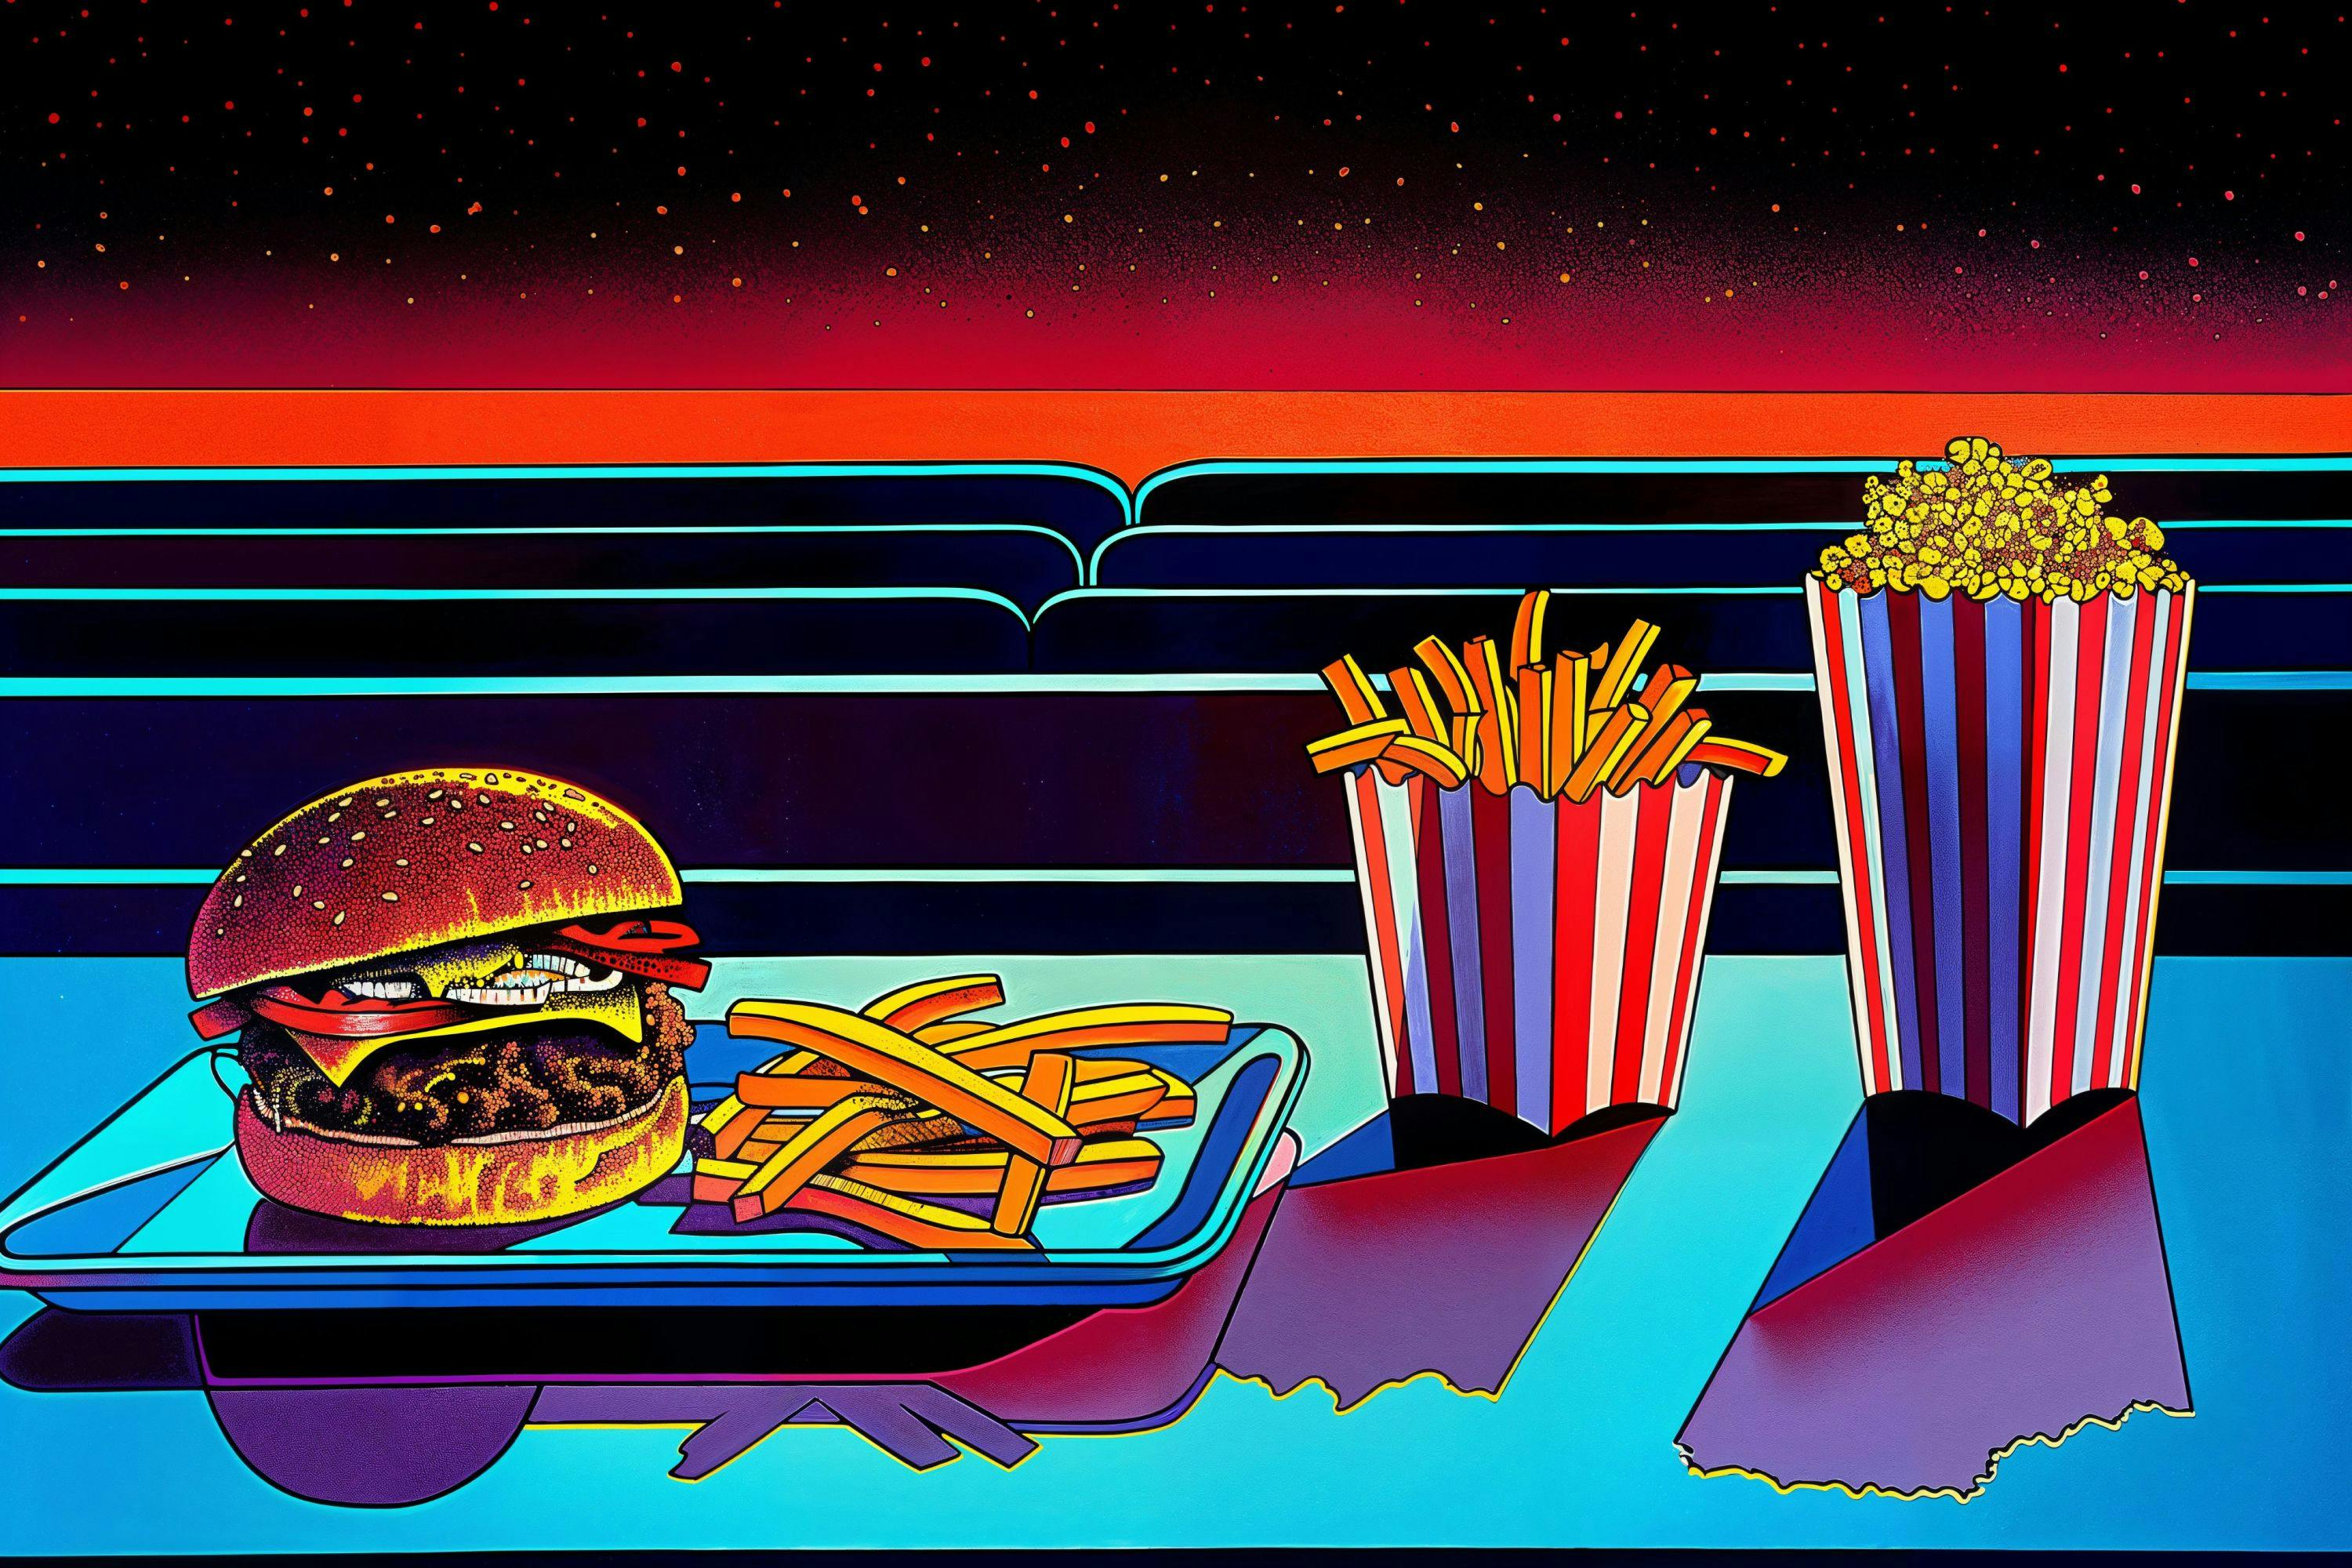 Digital illustration of a burger, fries, and popcorn in a movie theater